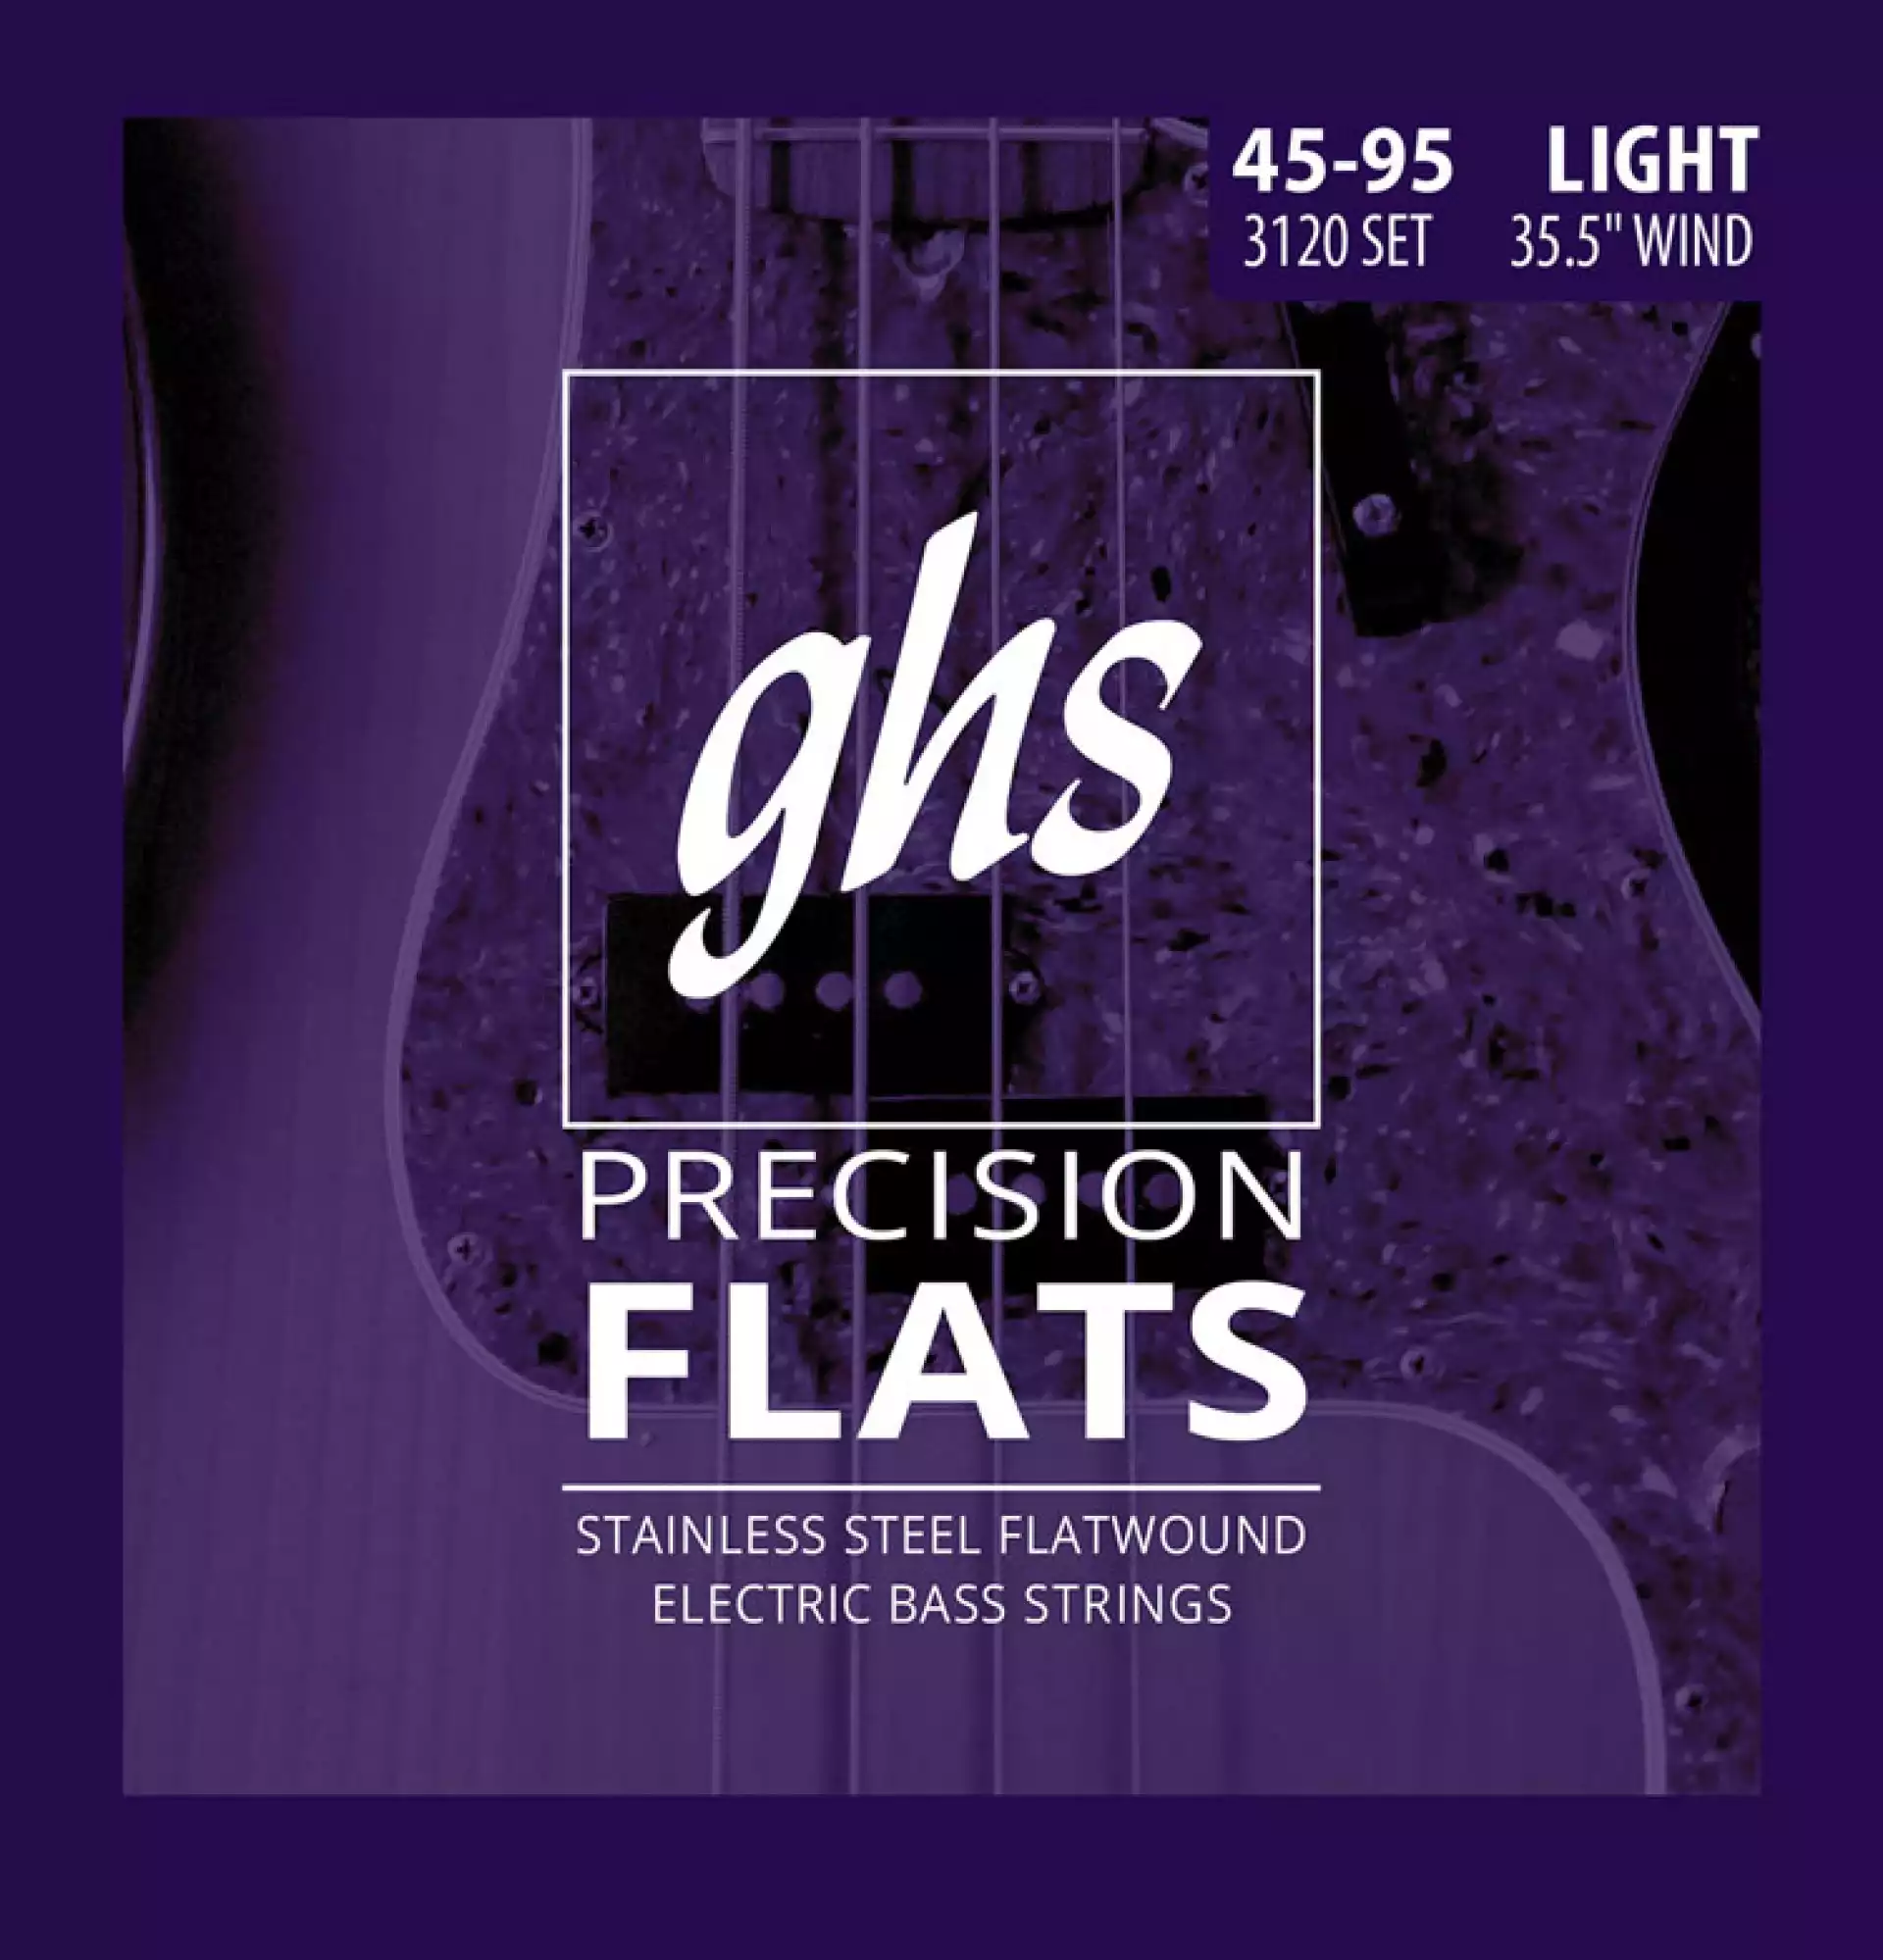 GHS 3120 Precision Flats Flatwound Bass Strings Medium Scale - 4-String 45-095 Light